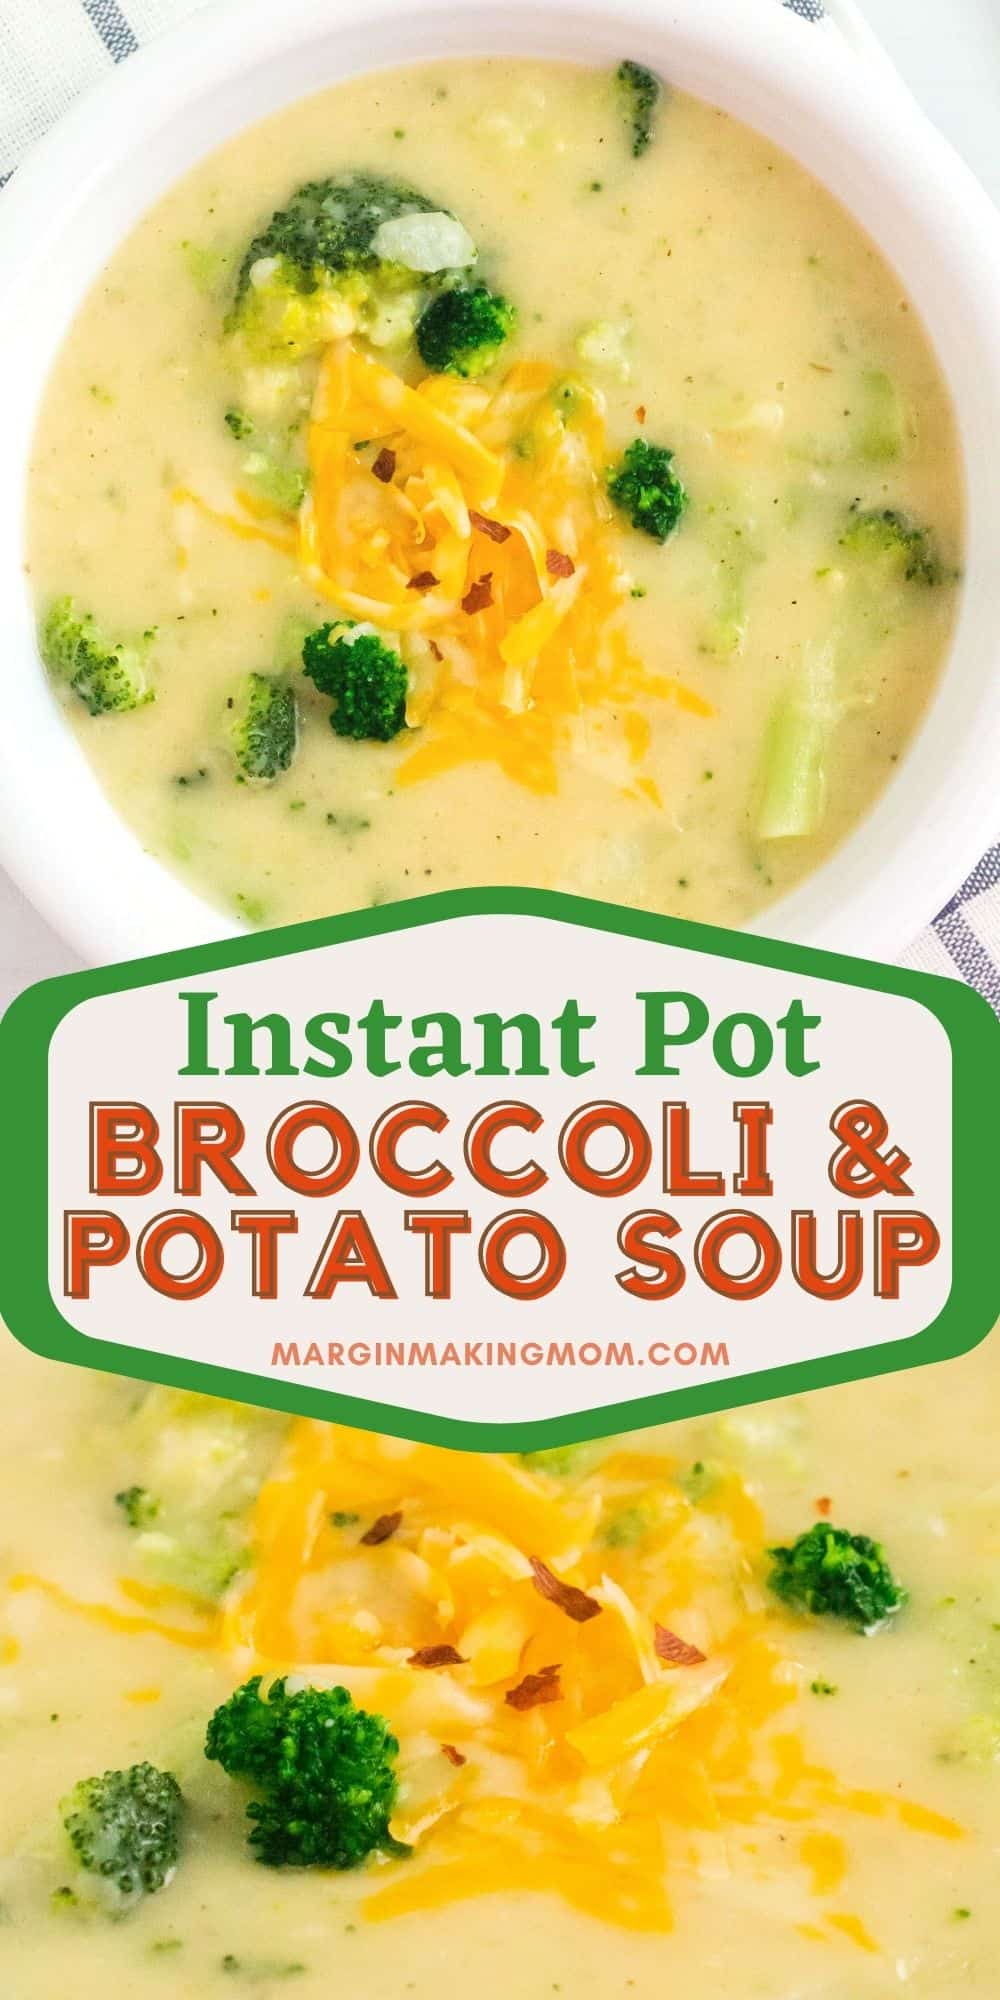 collage image featuring two photos. One is an overhead view of a white bowl with a serving of pressure cooker broccoli and potato soup. The other is a close-up detail view of the same soup.